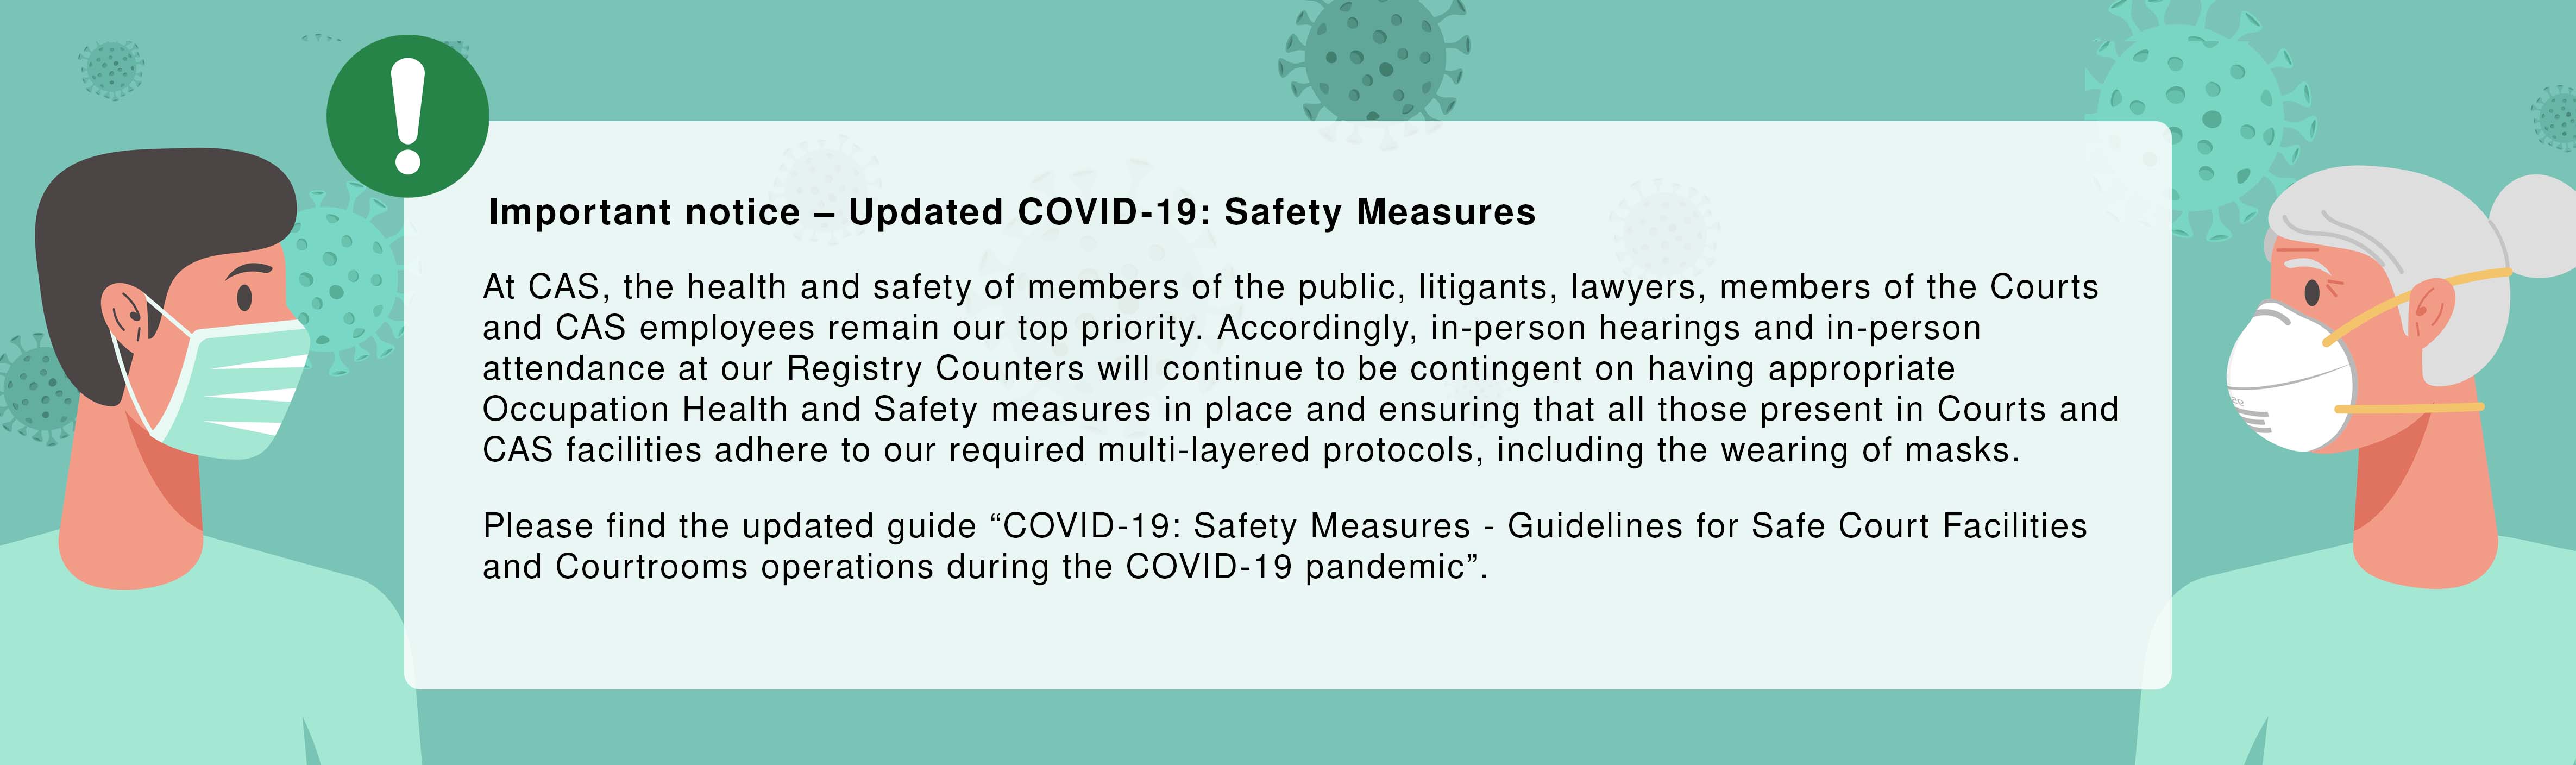 Tab 1: Impact of COVID-19 on CAS operations